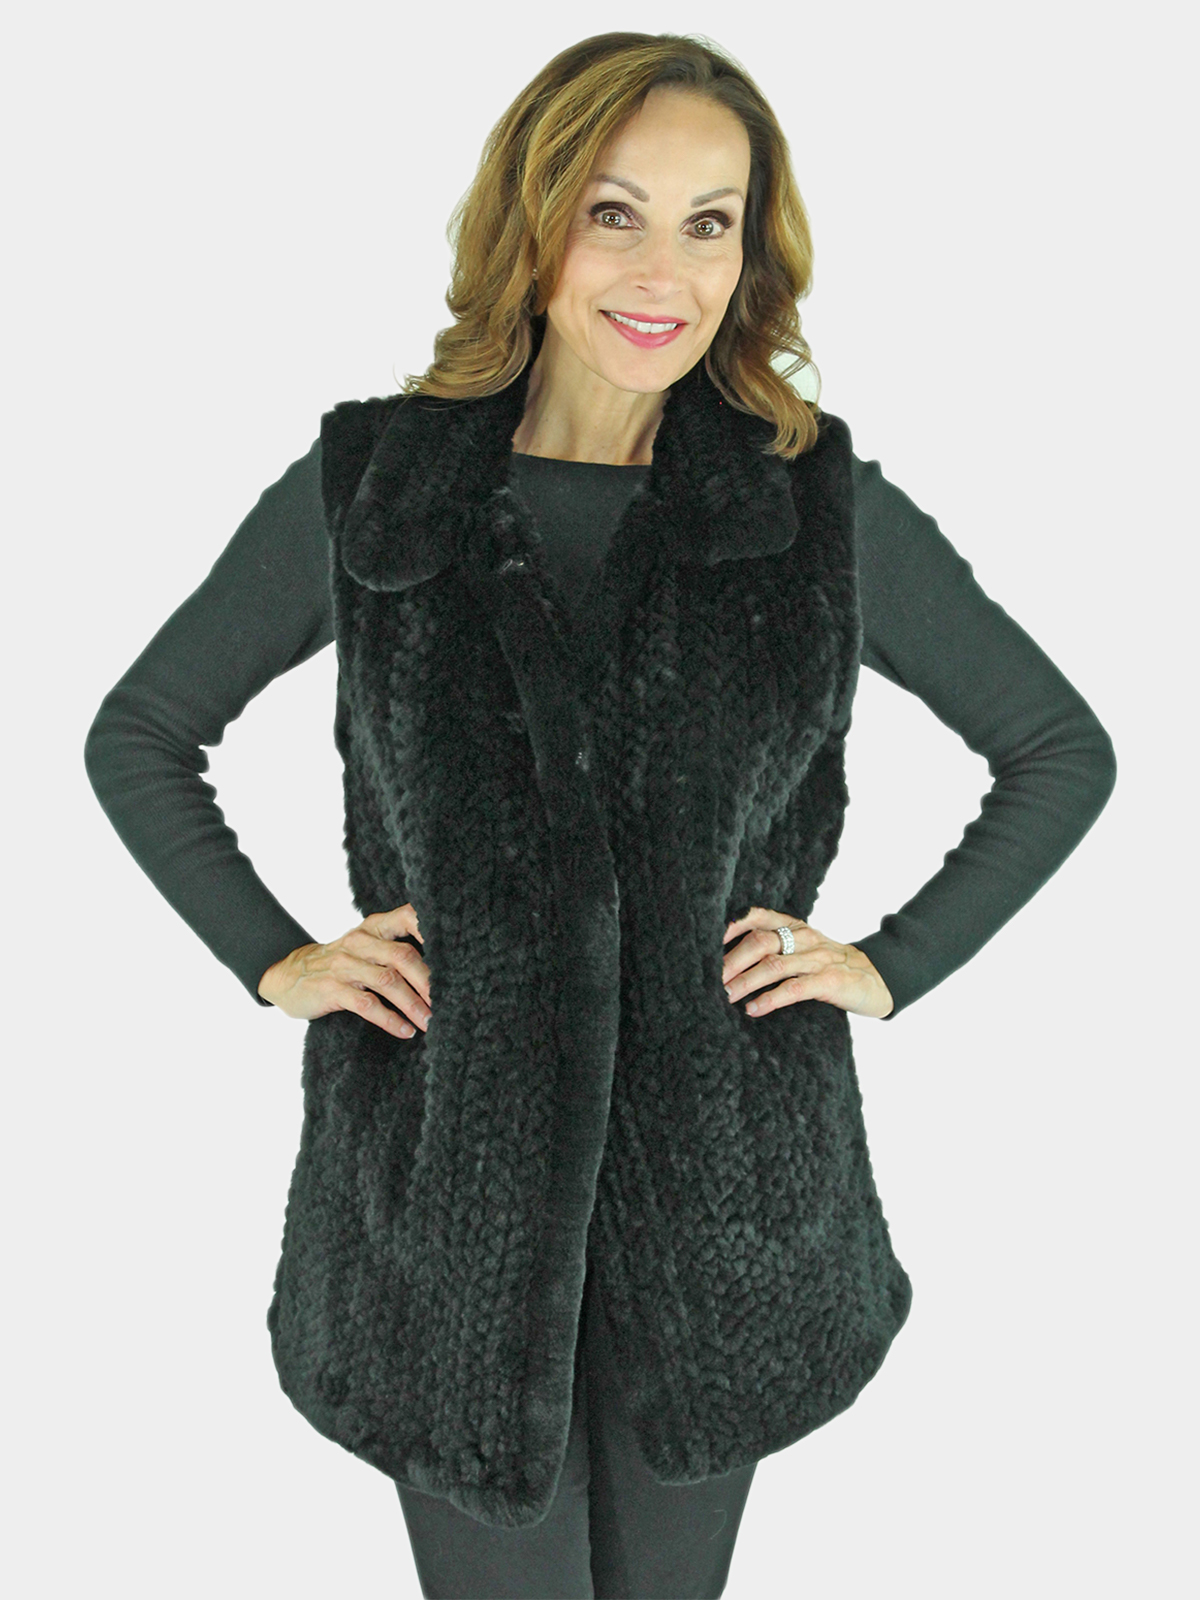 Black Knitted Rex Rabbit Fur Vest Large (Please Allow Up to 2 Weeks for Delivery)